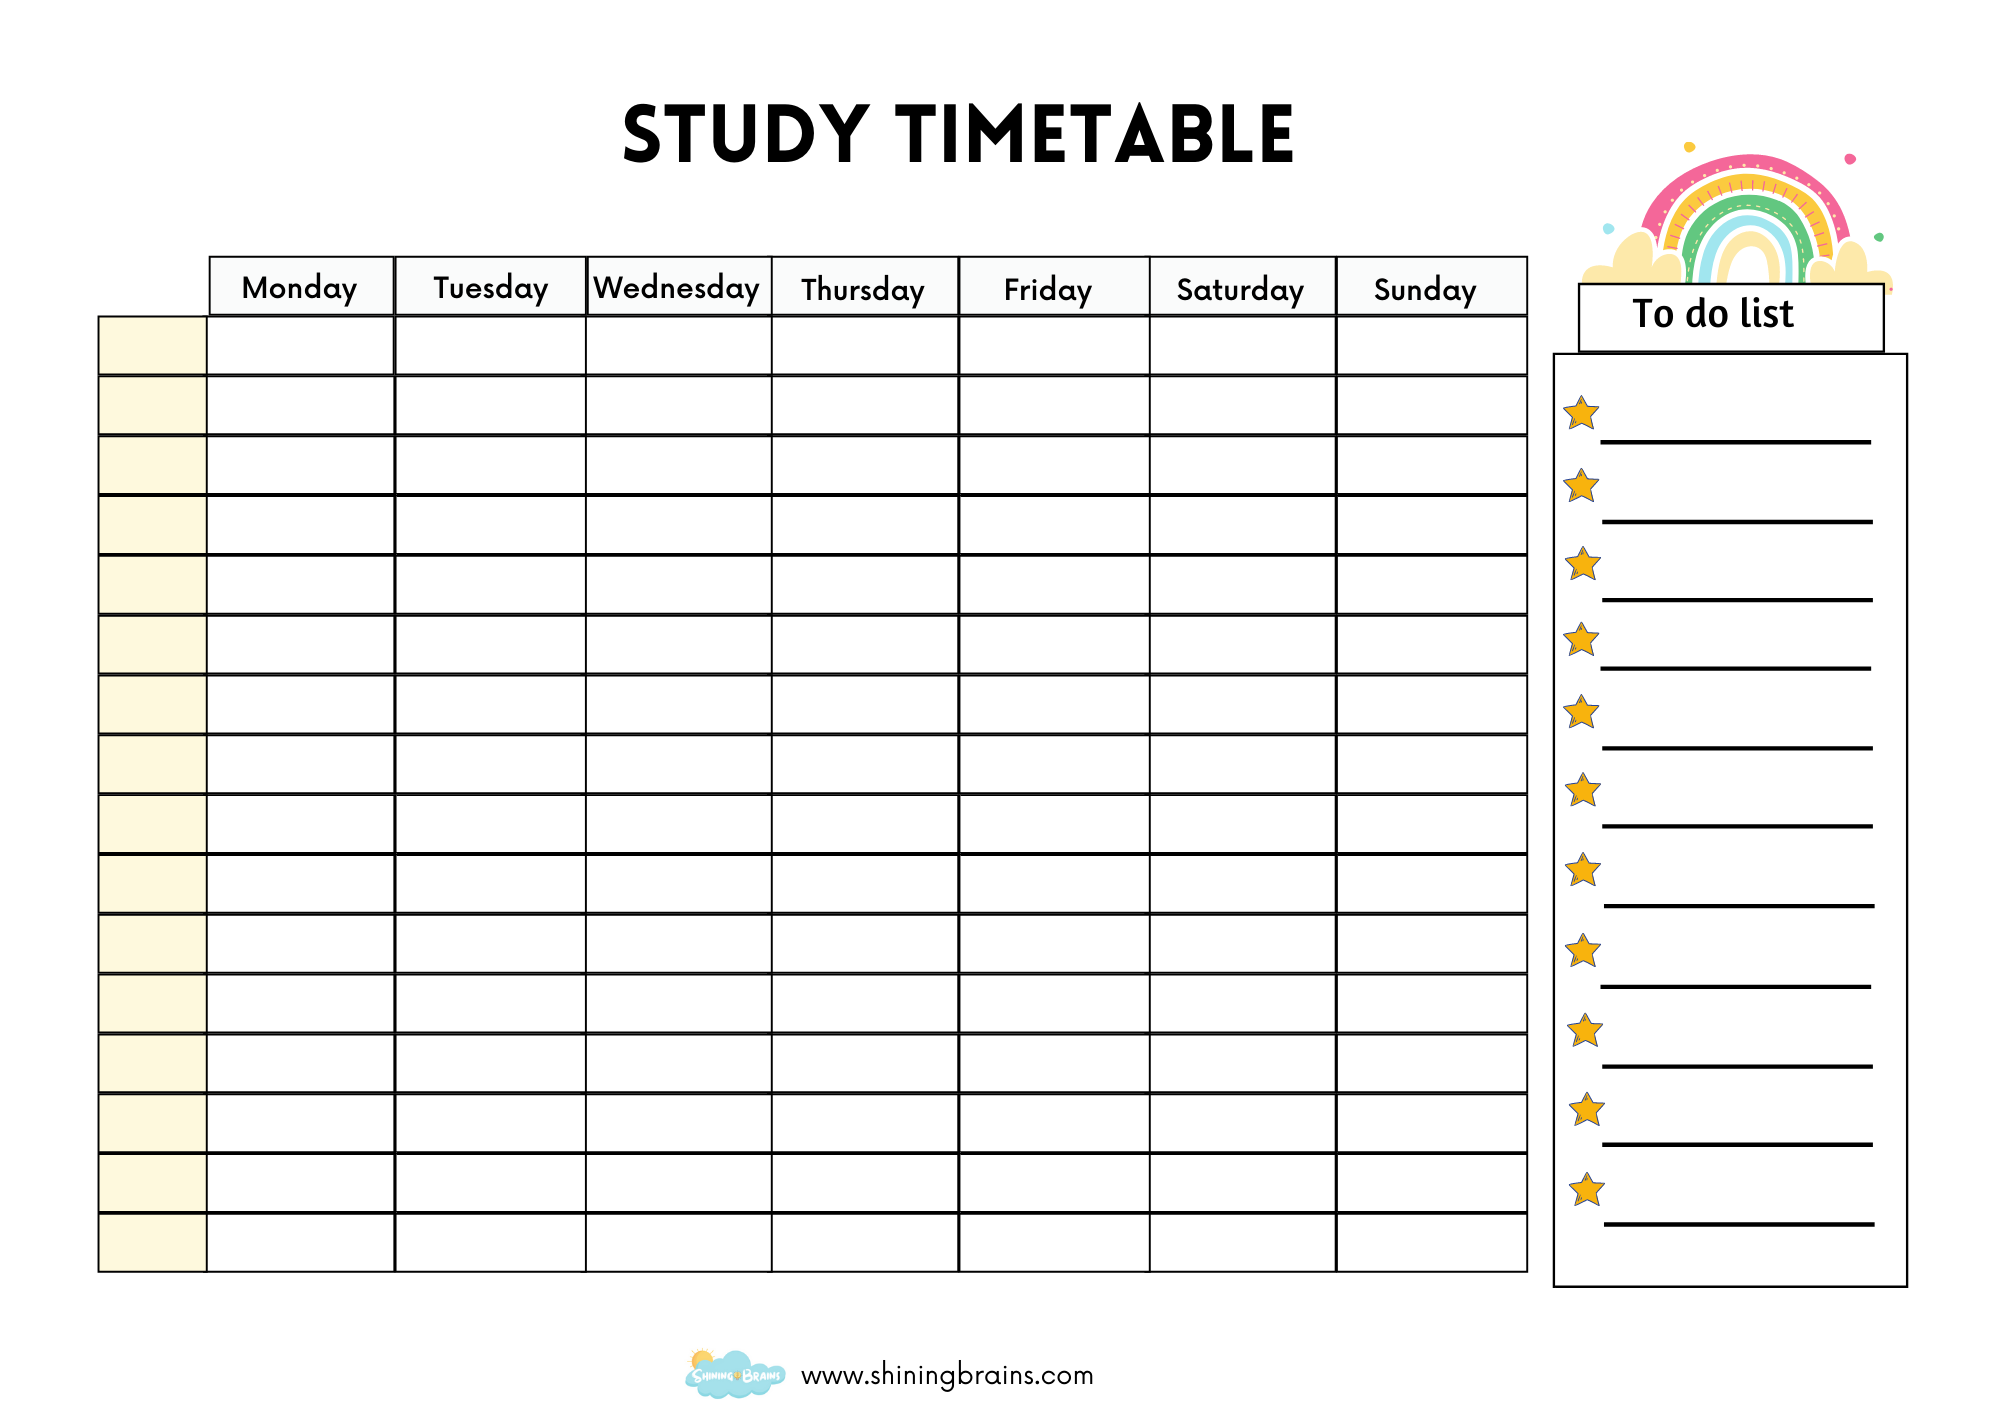 Study Timetable Template For Students Free Timetable Template Printable